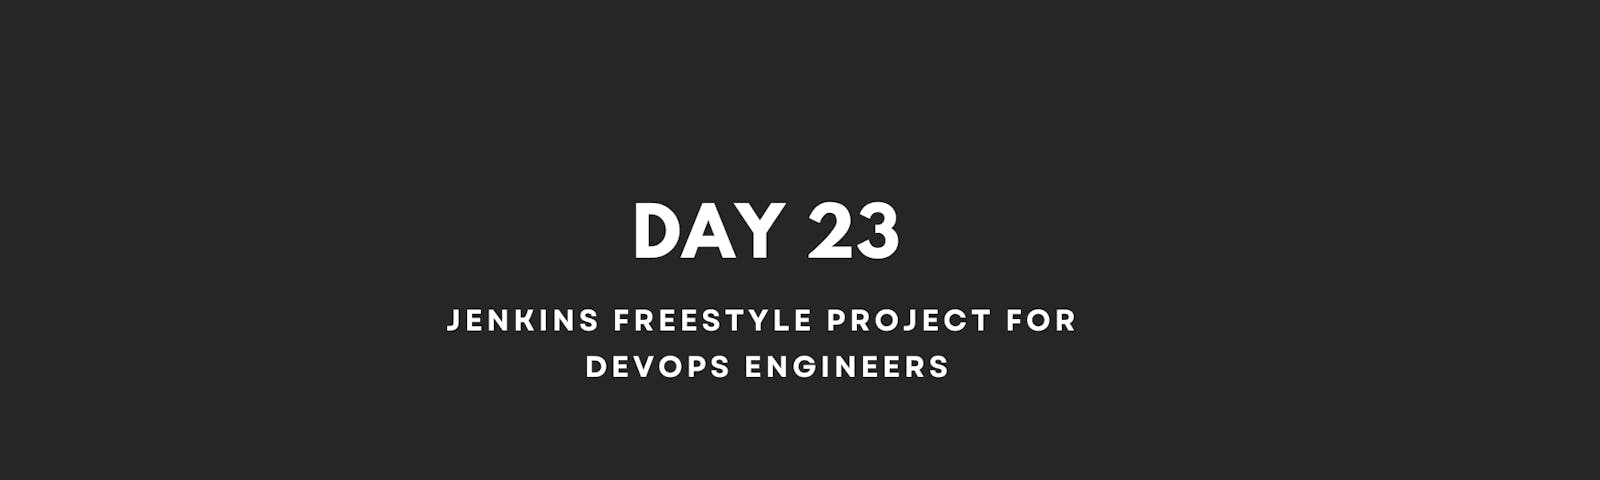 Jenkins Freestyle Project for DevOps Engineers